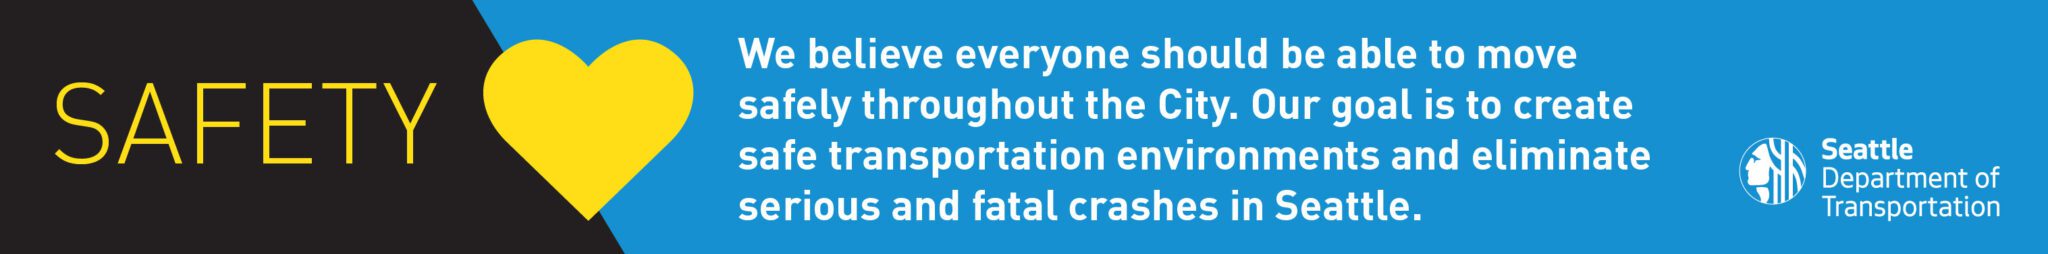 Graphic noting that safety is one of SDOT's core values and goals. The graphic includes the word "safety" in large letters, a yellow heart icon, the SDOT logo, and text that reads "we believe everyone should be able to move safely throughout the City. Our goal is to create safe transportation environments and eliminate serious and fatal crashes in Seattle."